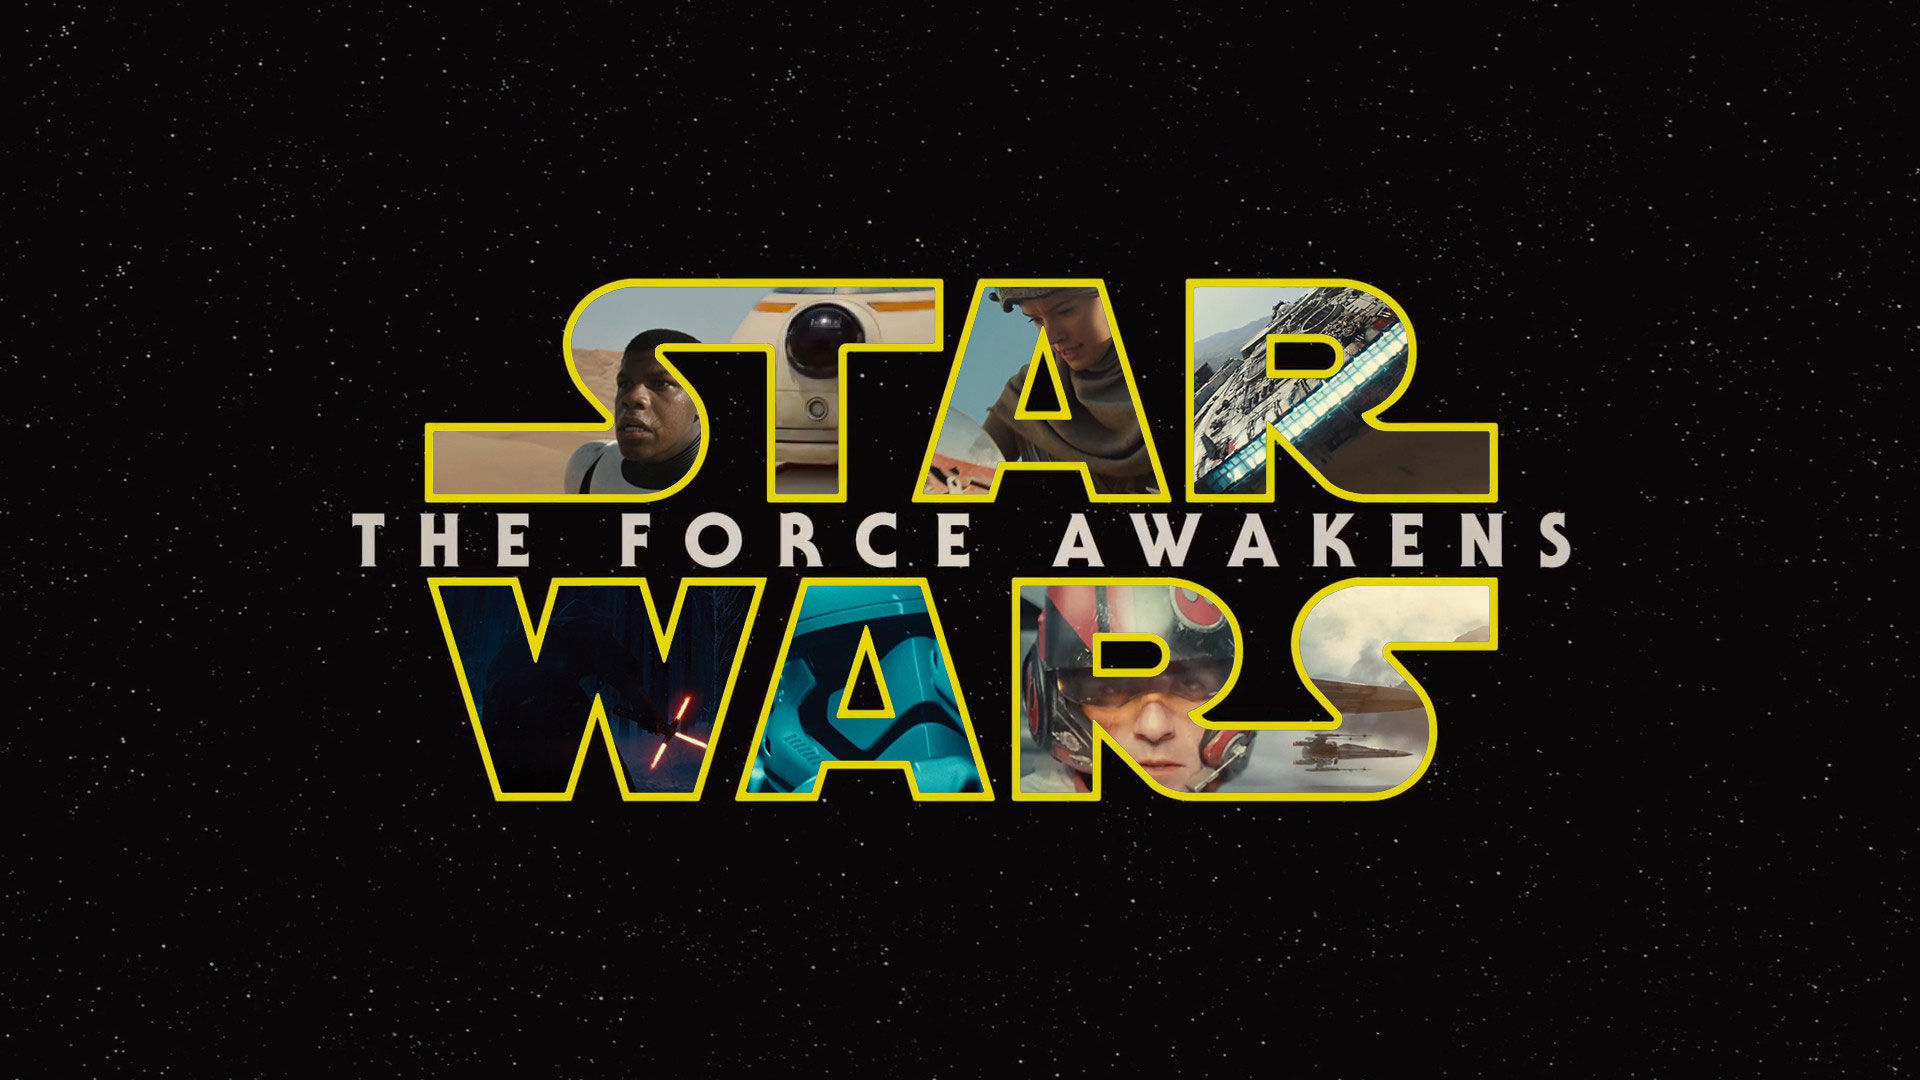 Tlcharger des Wallpapers Star Wars 7 The Force Awakens pour Mobile